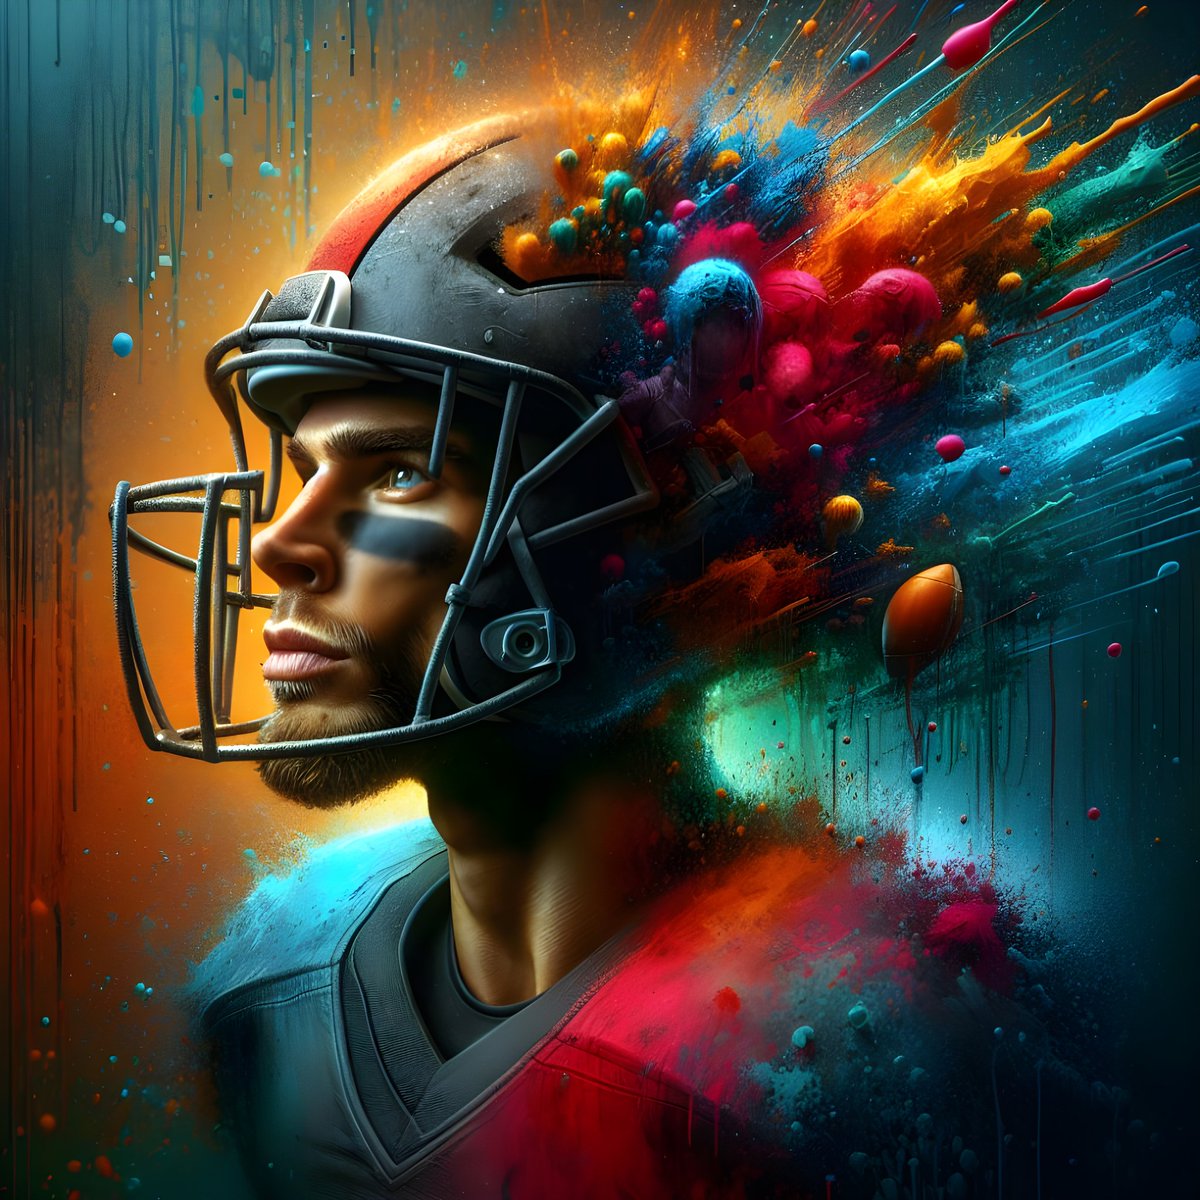 These are unique digital artworks that capture the essence of sport in a way never seen before.  

If you like it follow me!  

opensea.io/BlackSharkNFT 

#NFT #CryptoArt #DigitalArt #FantasyNFT #Rarible #Opensea #NFTCreator #NFTCollector #NFTInvestor #OpenseaNFTs #PolygonNFTs